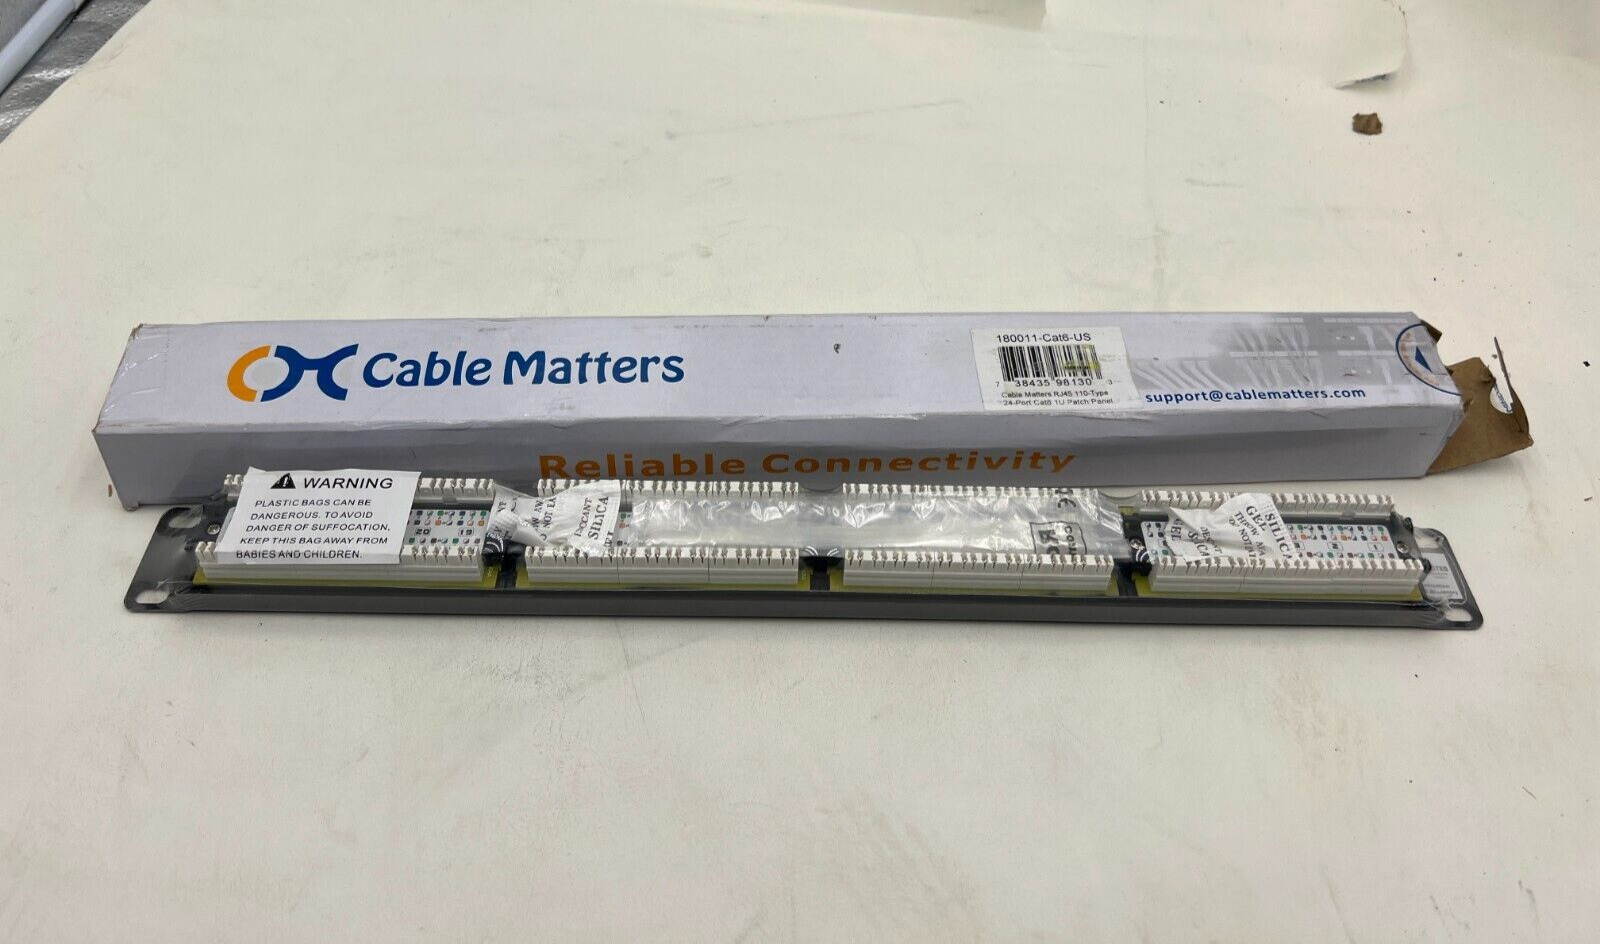 Cable Matters 180011-CAT6 24-Port Rackmount or Wallmount Patch Panel